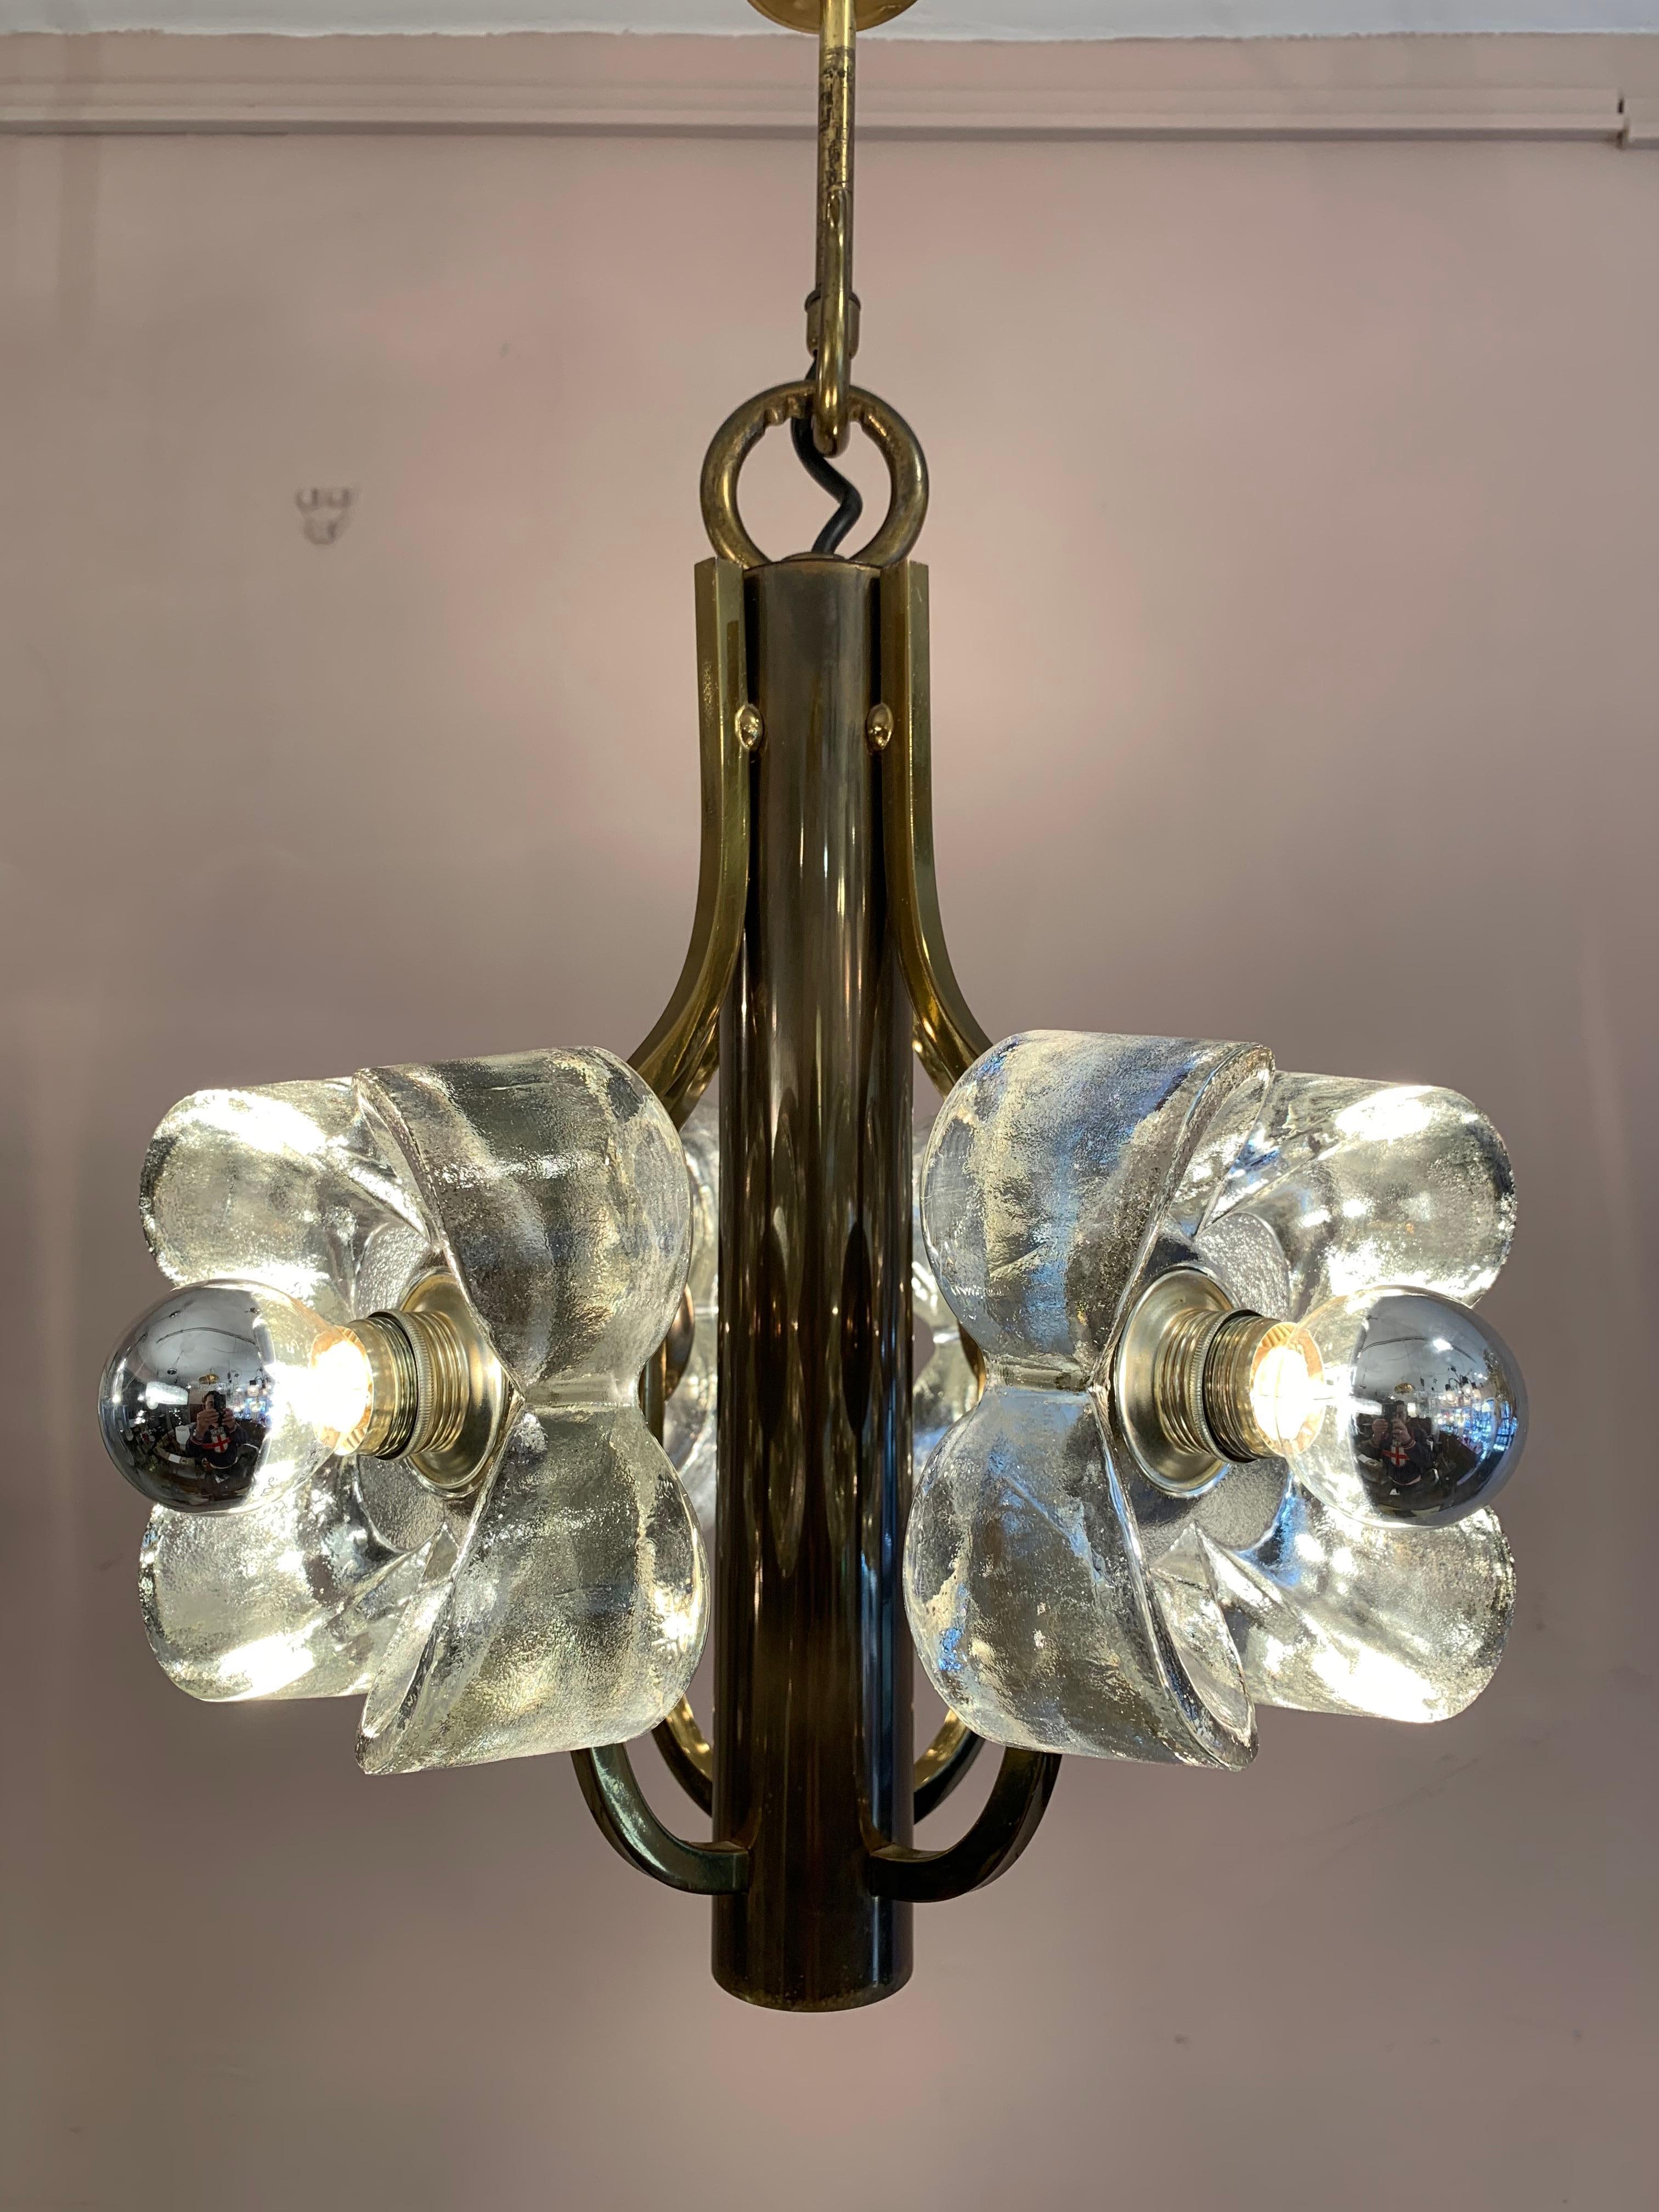 A wonderful 1960s Sische Leuchten pendant ceiling hanging light. The single brass column is suspended at the top by a large brass ring and feature hook at the bottom of a rod which connects it to the ceiling cup. The four thick glass flowers each